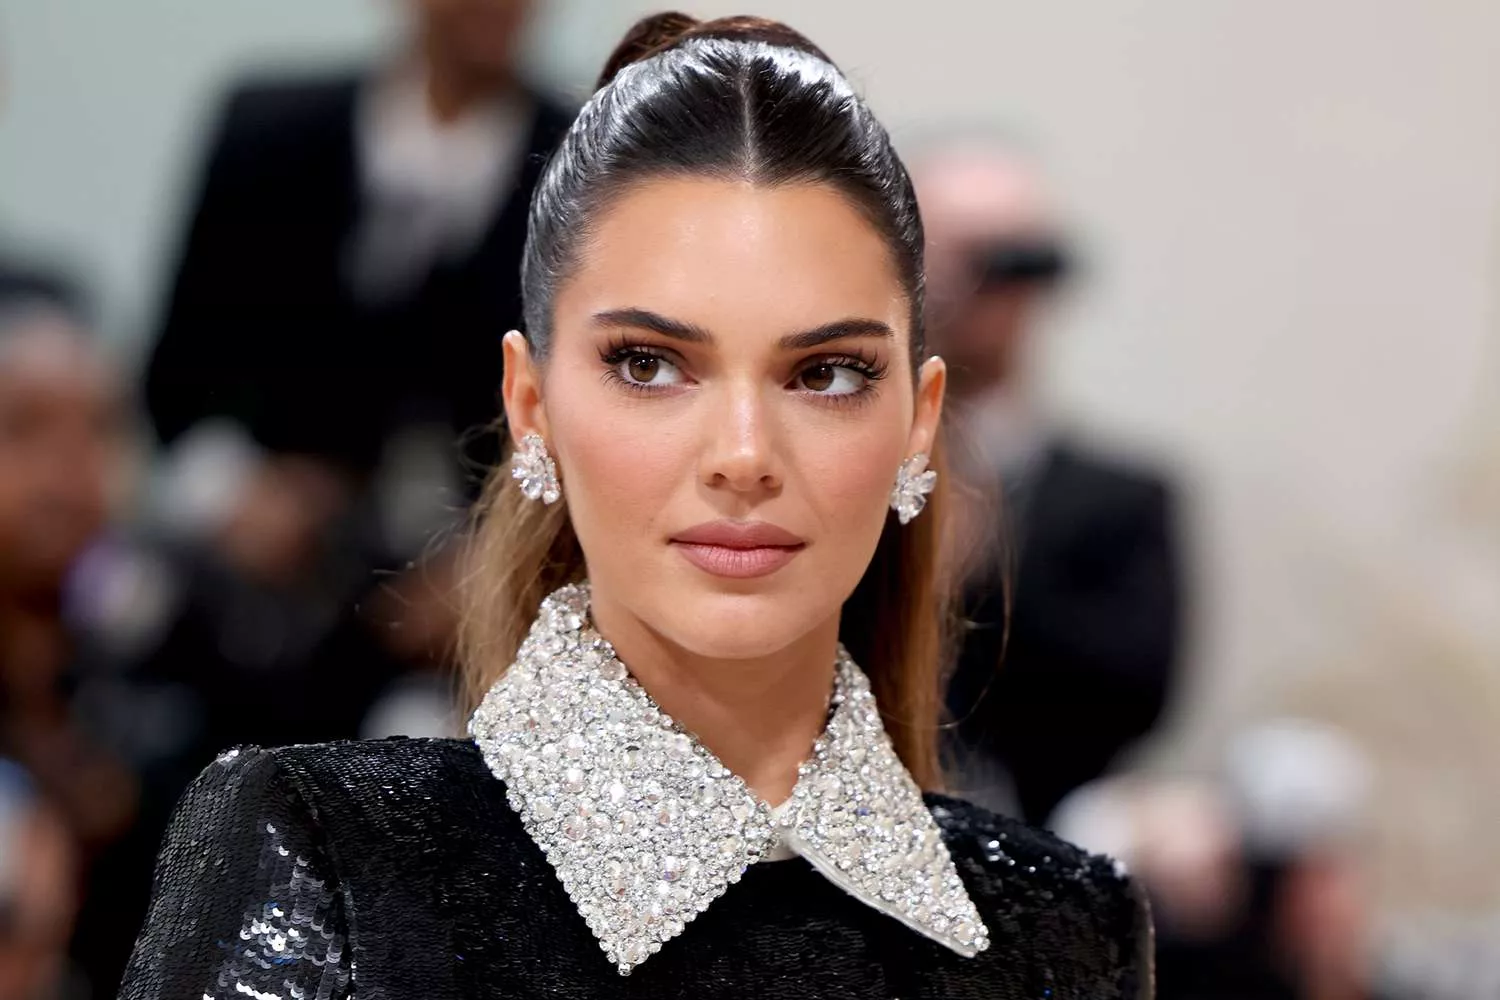 Image featuring Kendall Jenner, adorned with stylish elegance, accompanying a compilation of intriguing facts about her life and career.